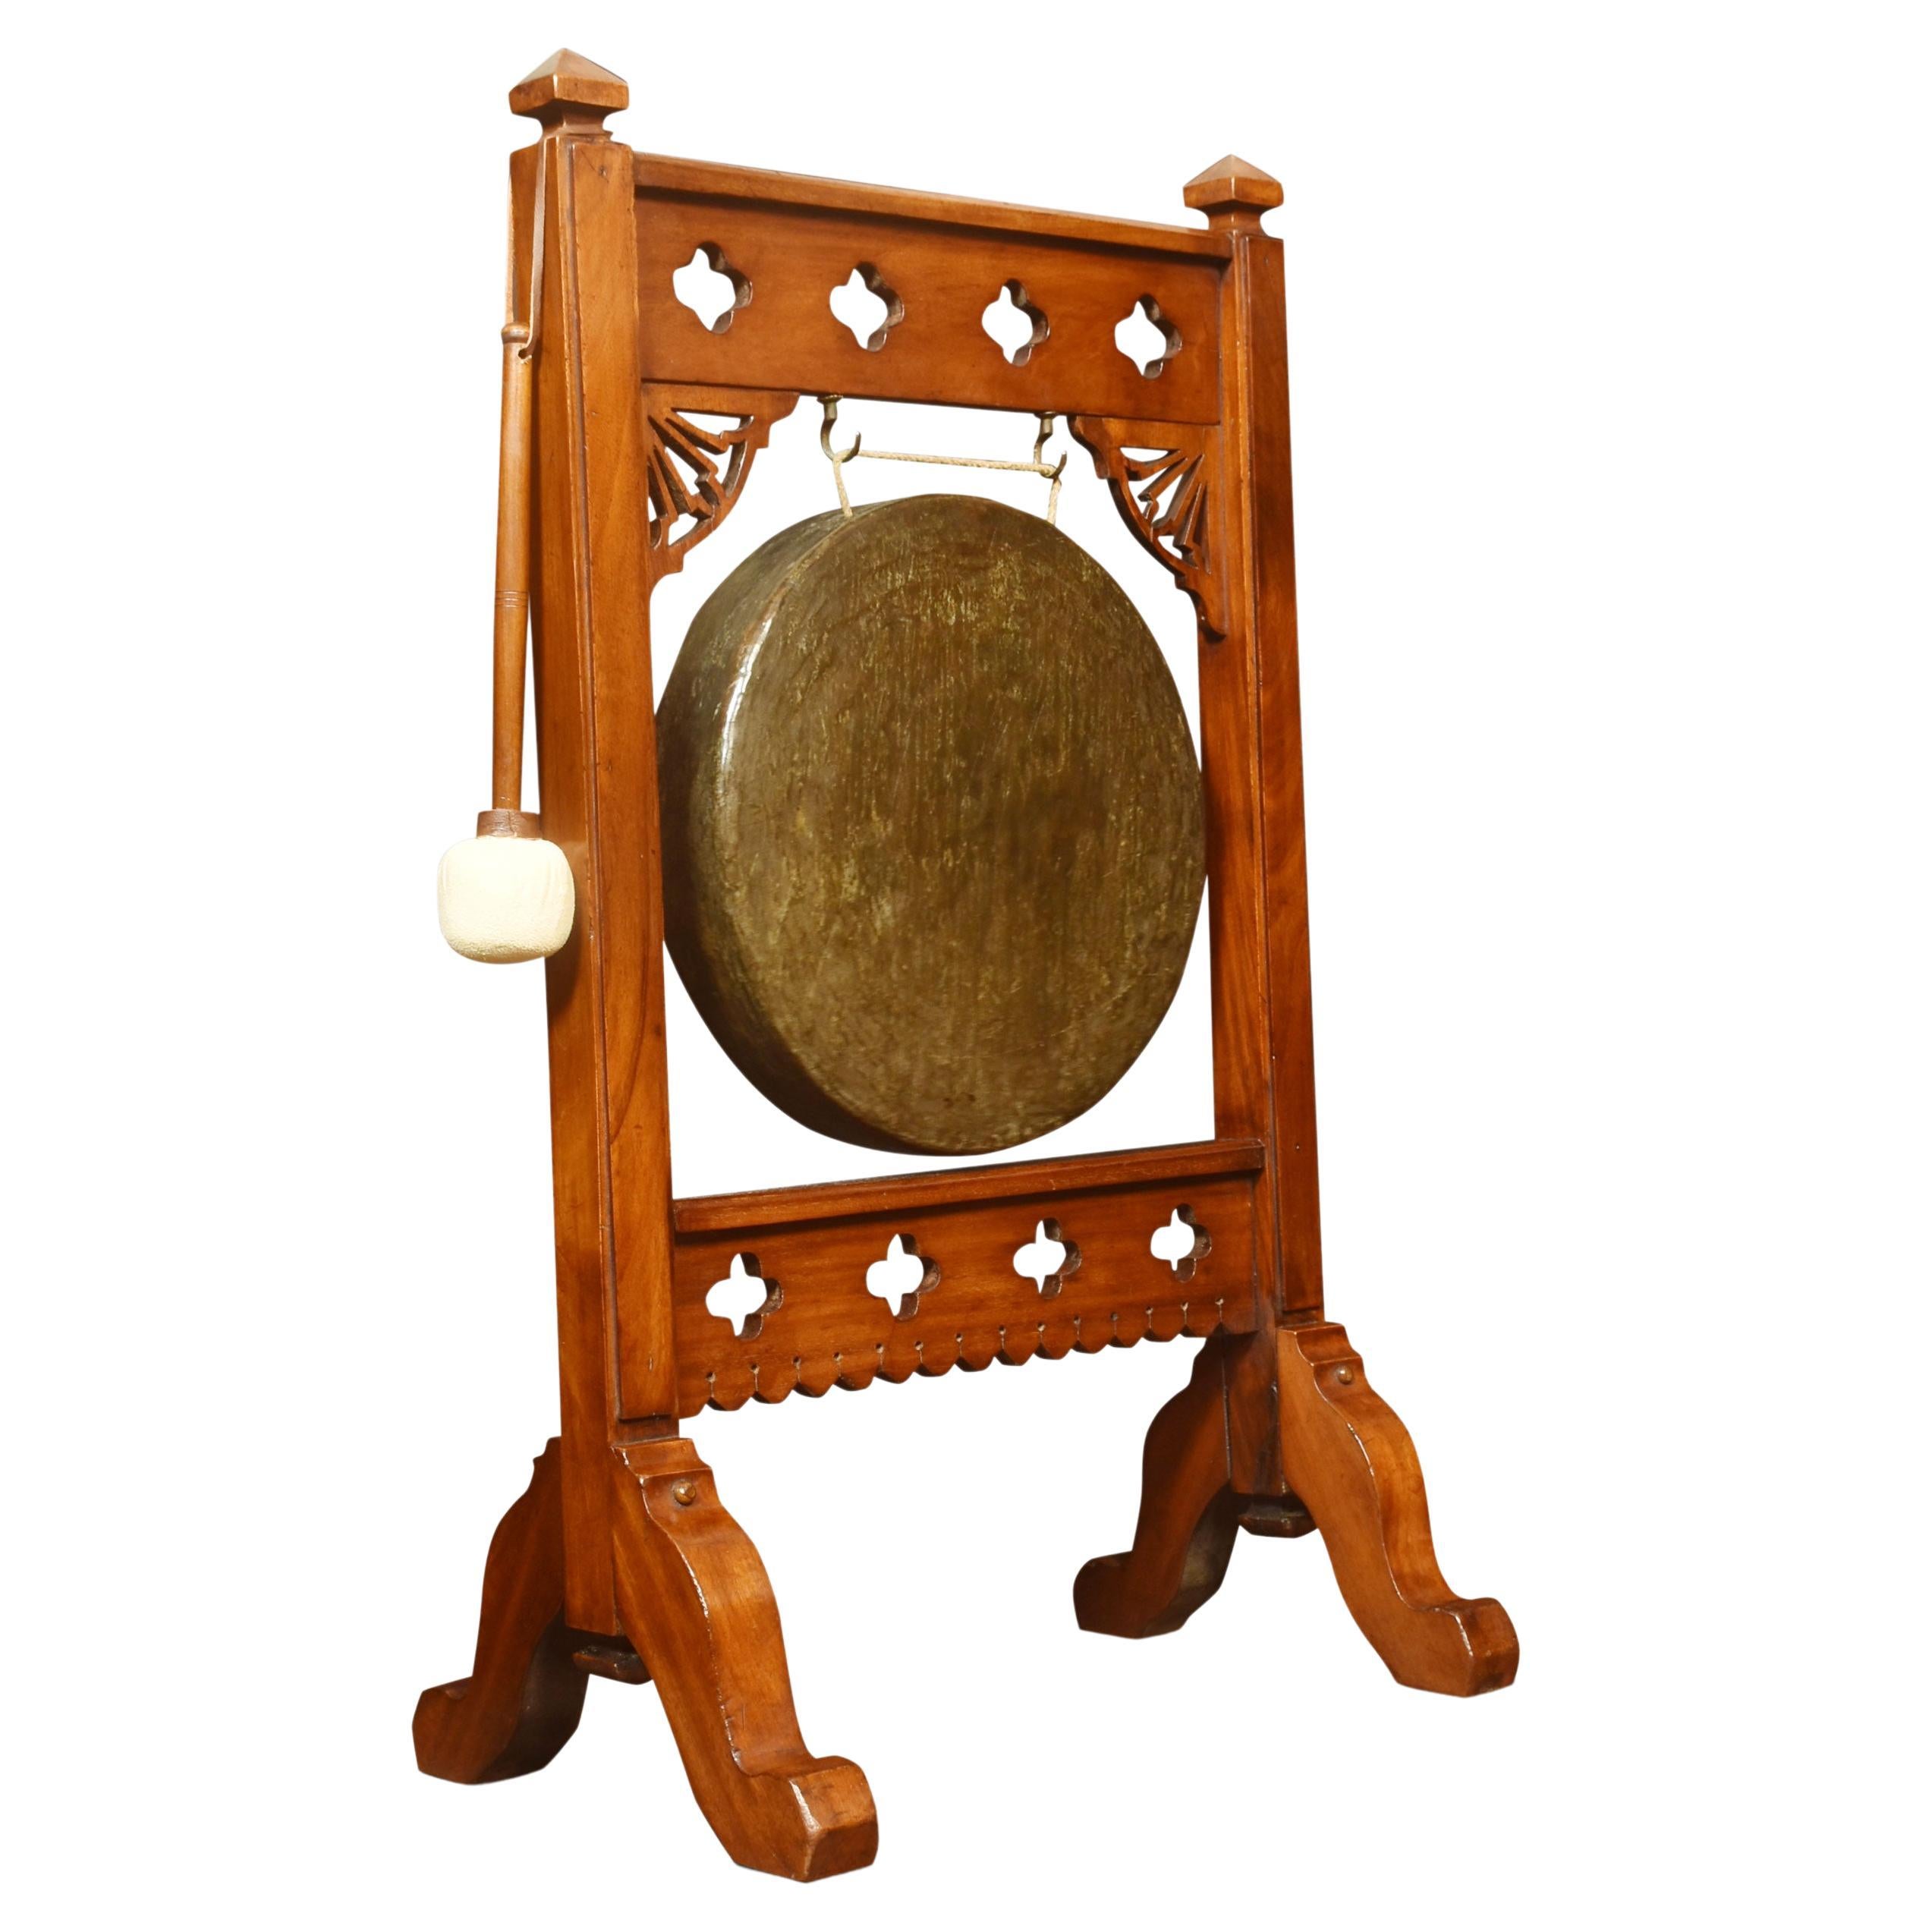 Gothic Revival Dinner Gong For Sale